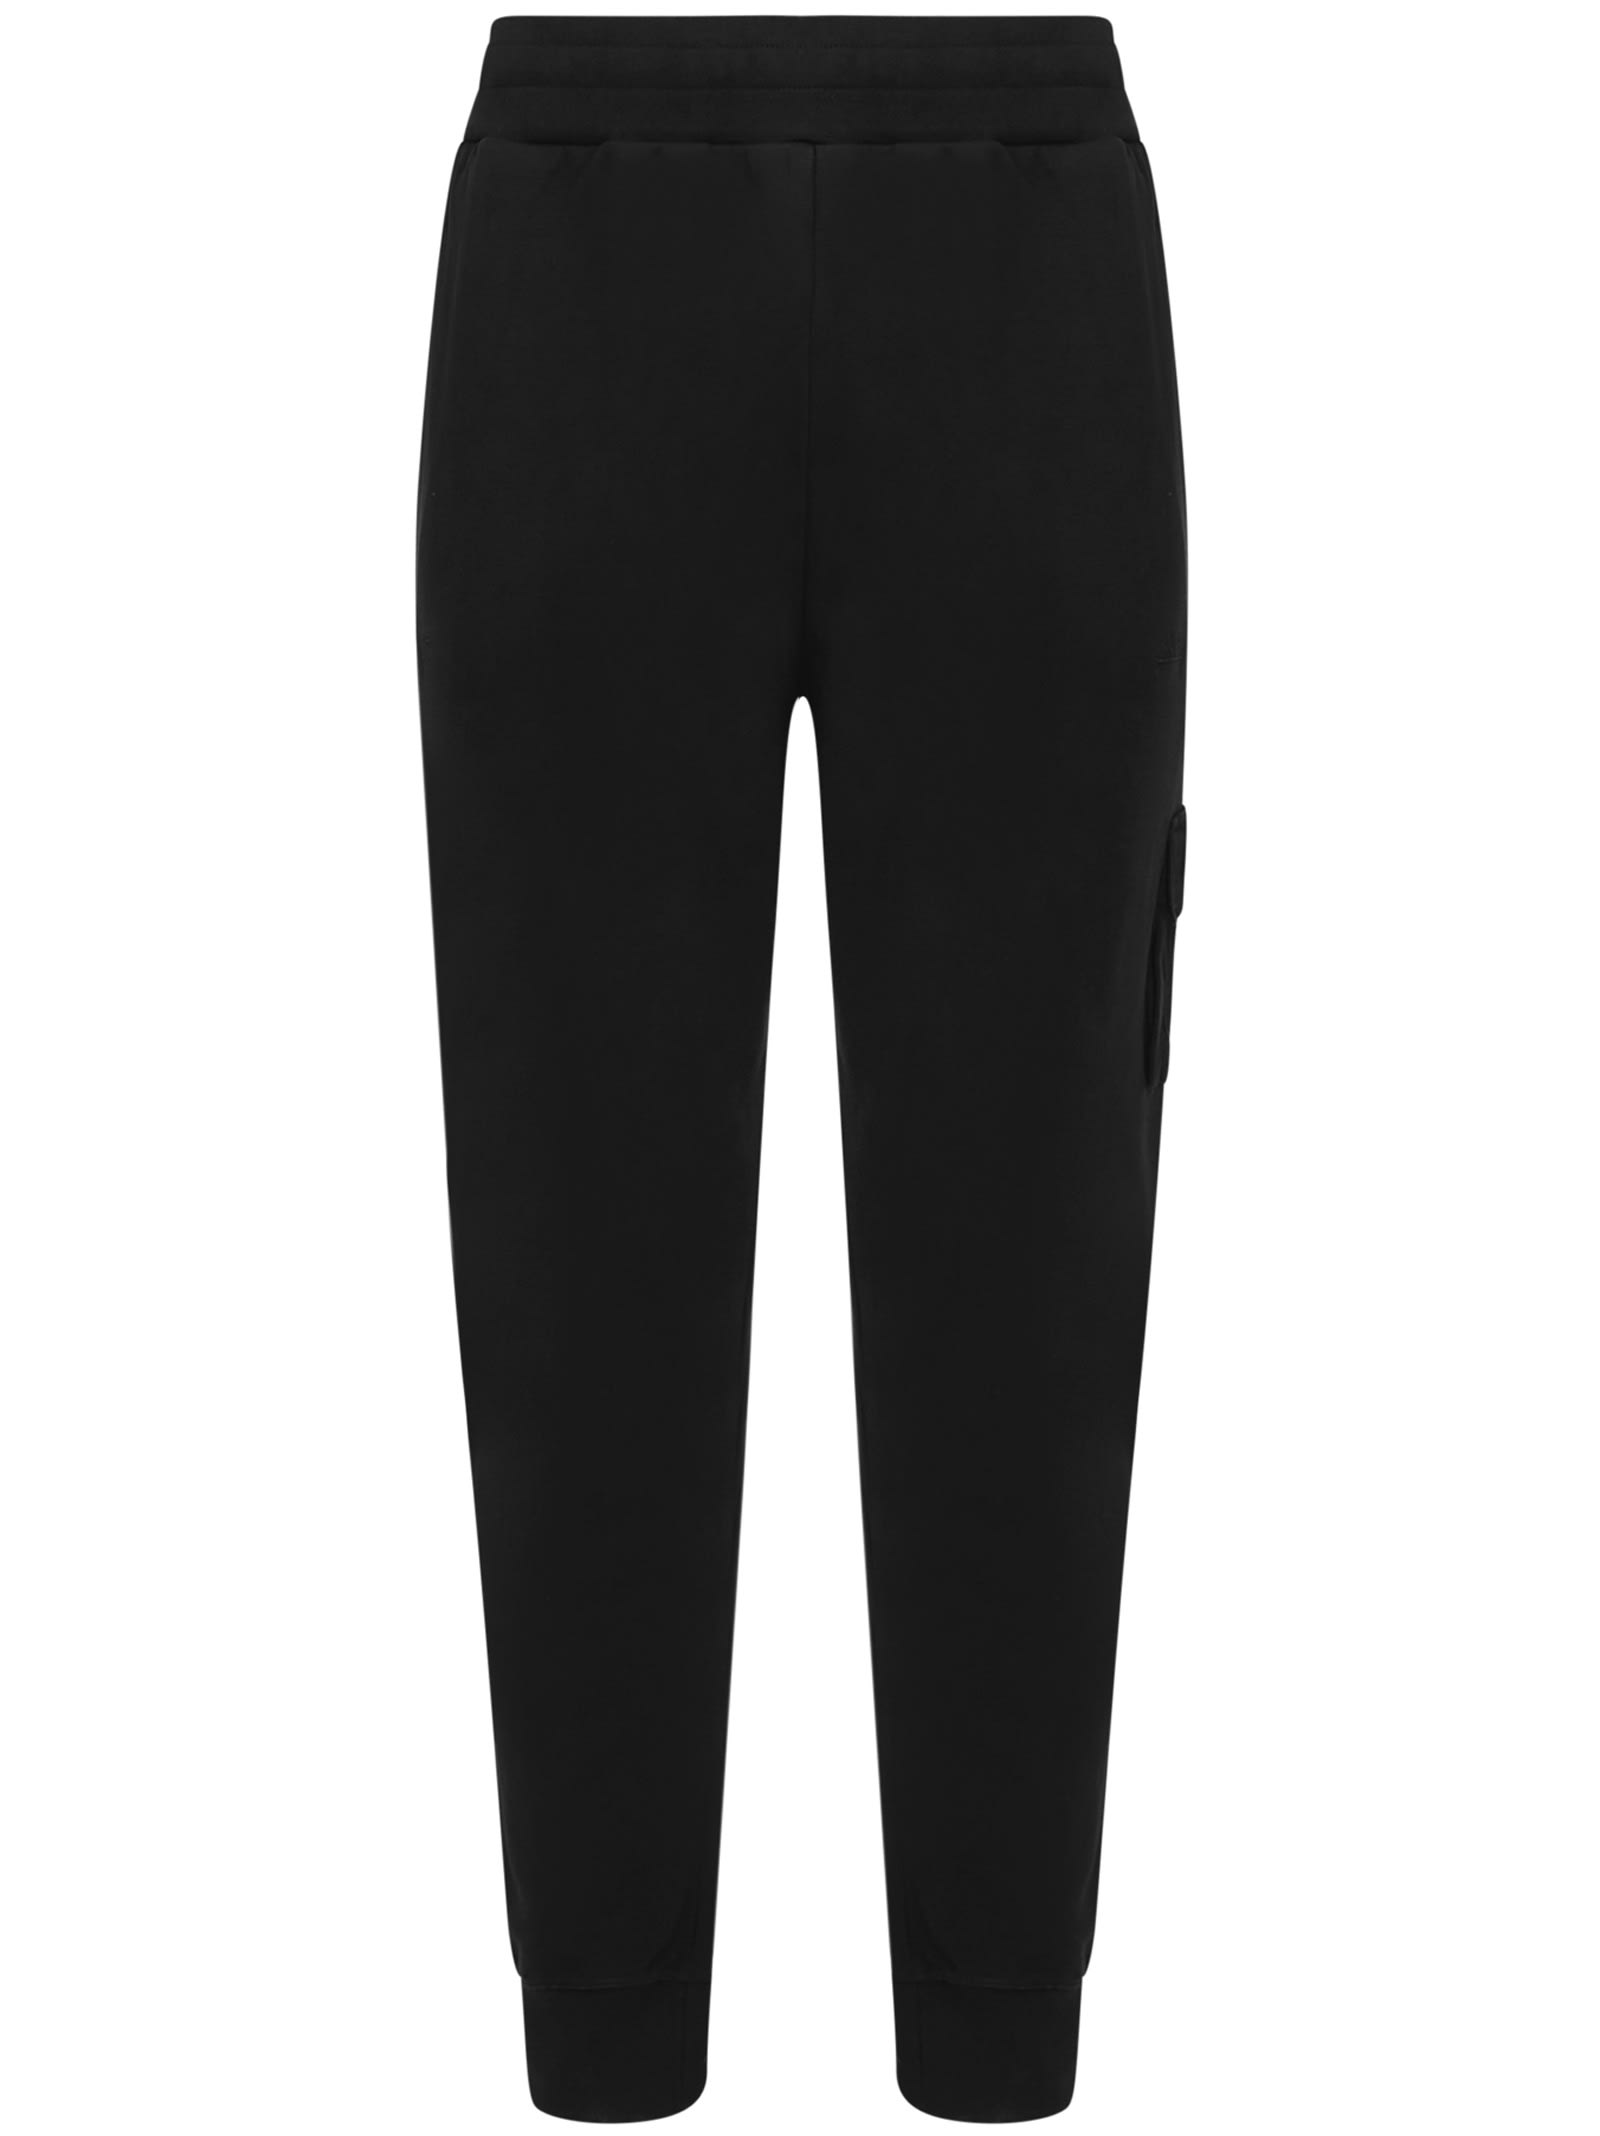 A-COLD-WALL A Cold Wall Essential Trousers